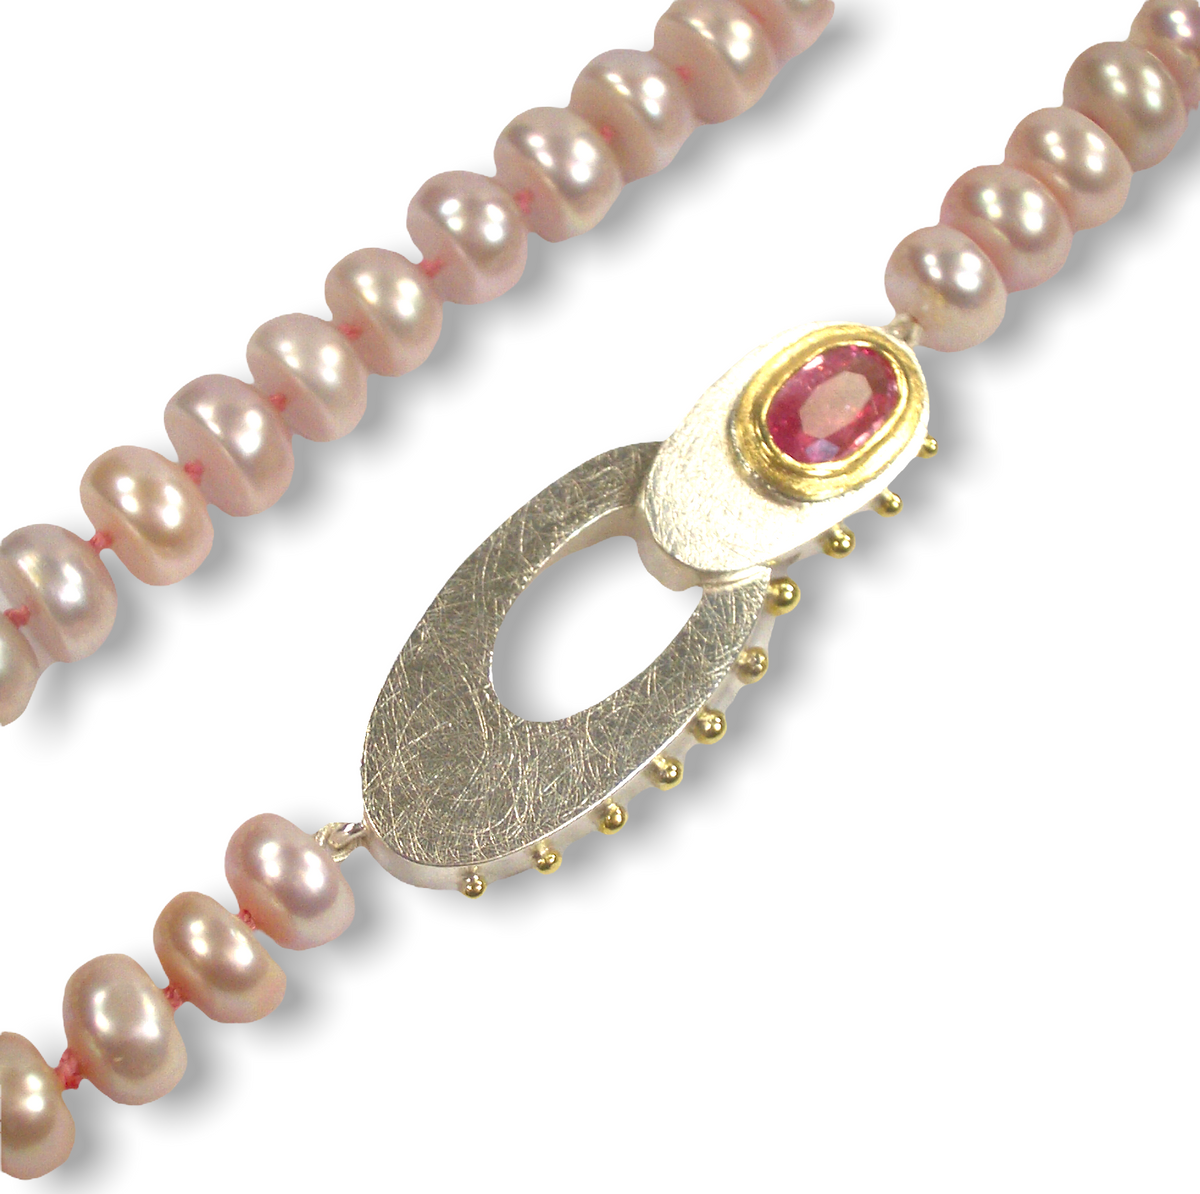 Sarah&#39;s Custom Bespoke Pink Pearl Necklace With Oval Box Clasp | In Silver And 18ct Yellow Gold | Set With A Pinky Peach Padparadscha Sapphire